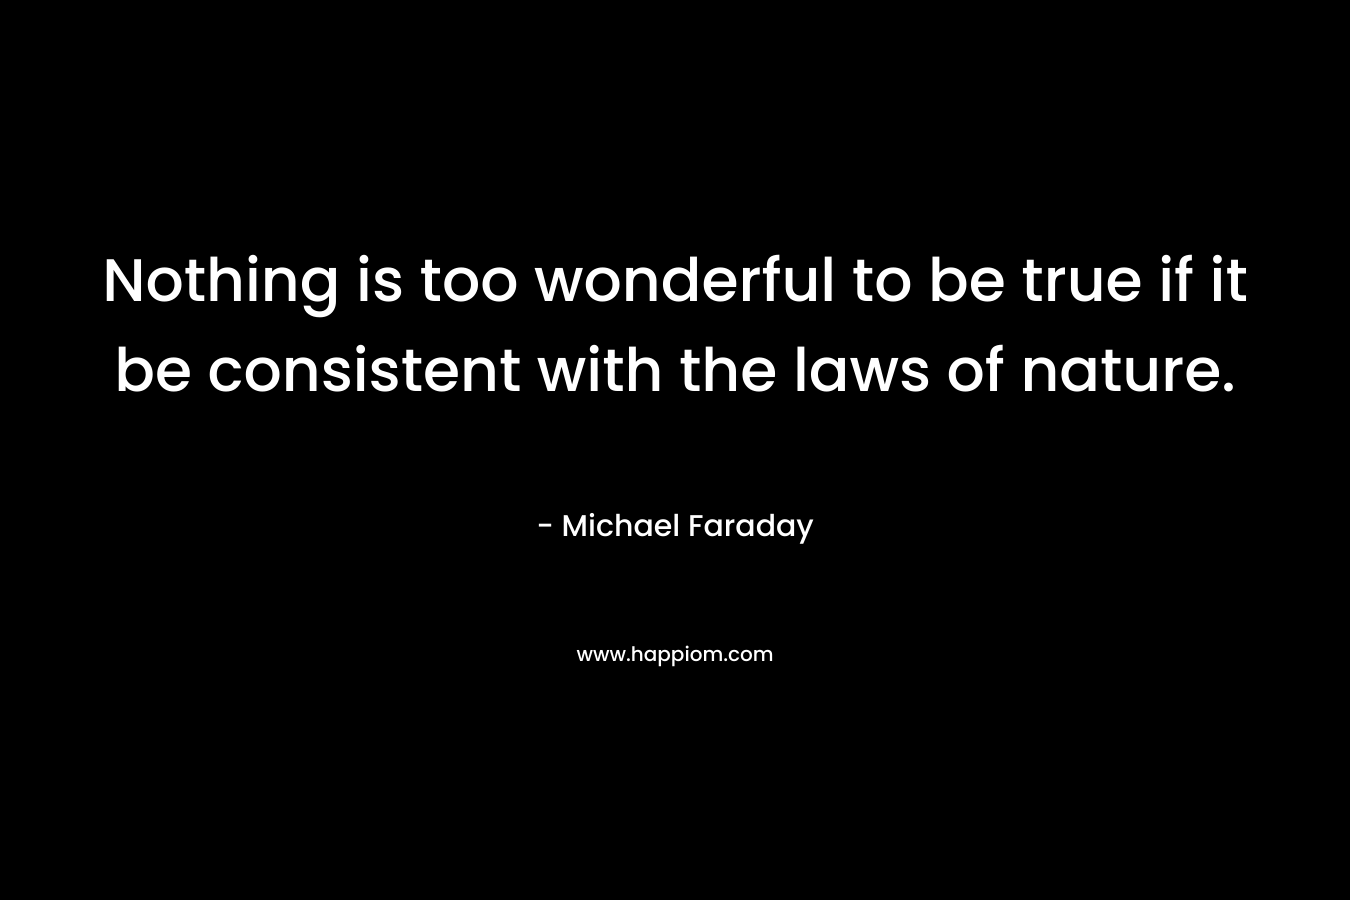 Nothing is too wonderful to be true if it be consistent with the laws of nature. – Michael Faraday